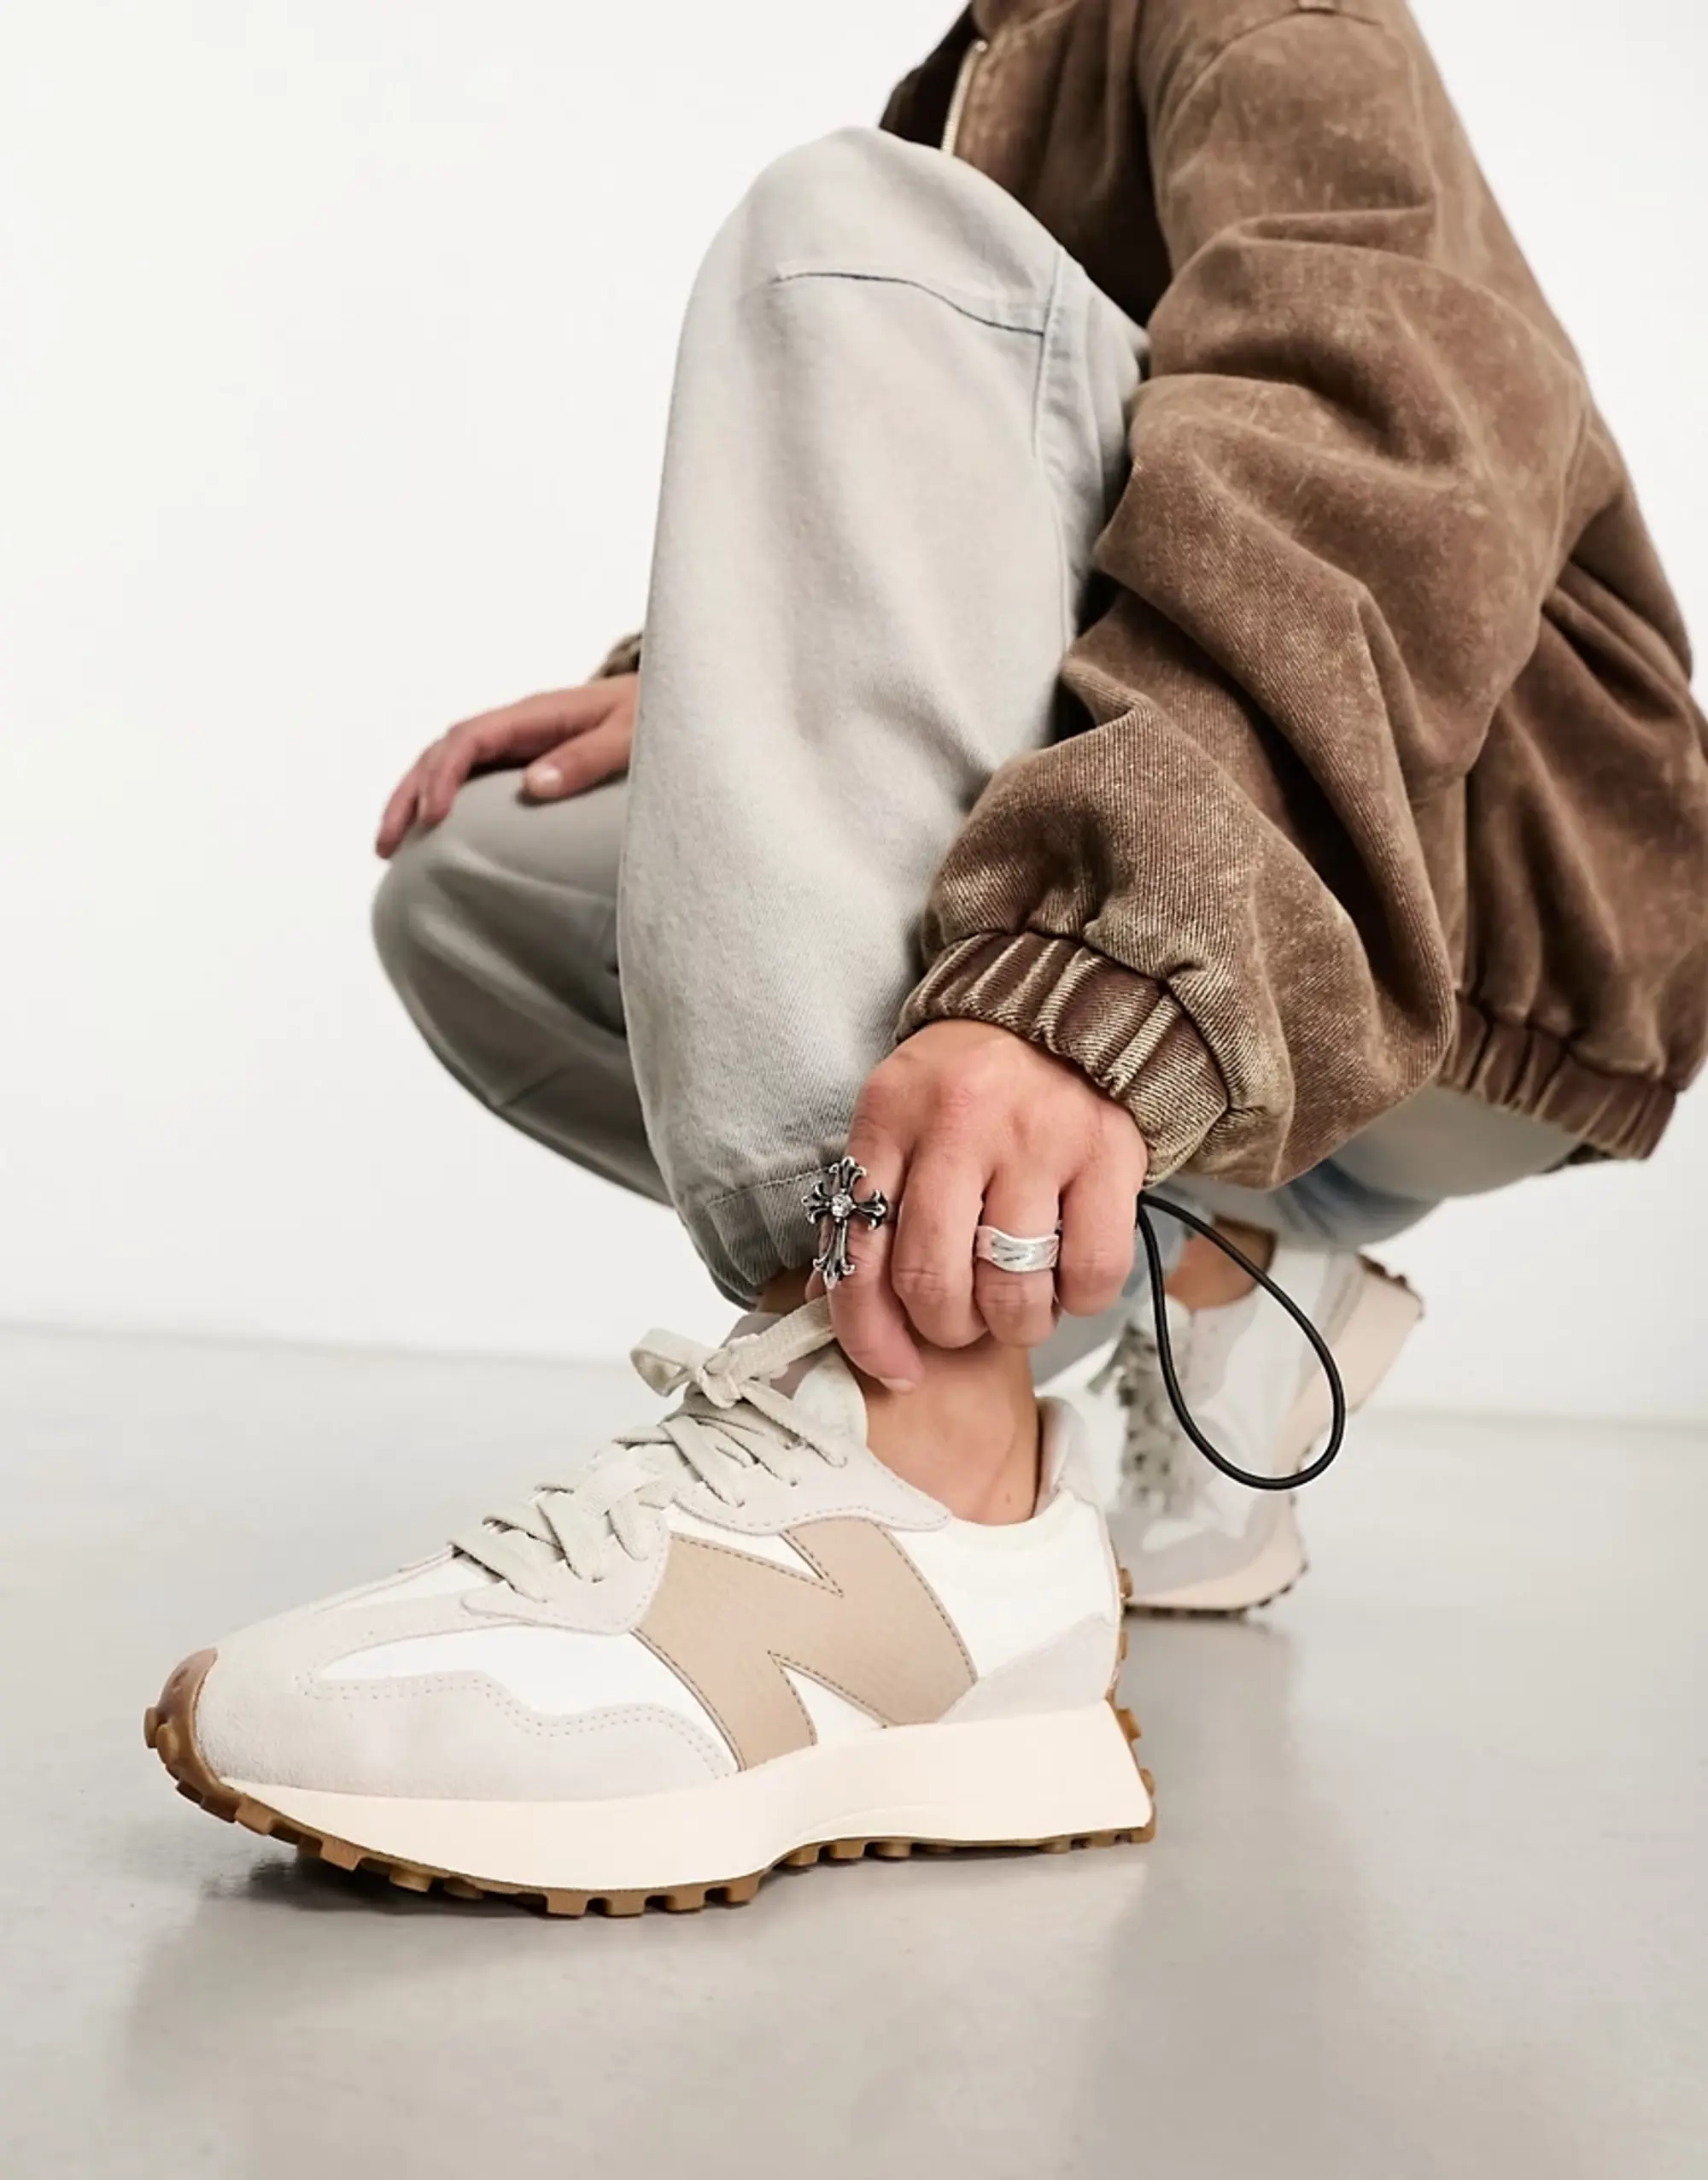 New Balance 327 trainers in white & brown